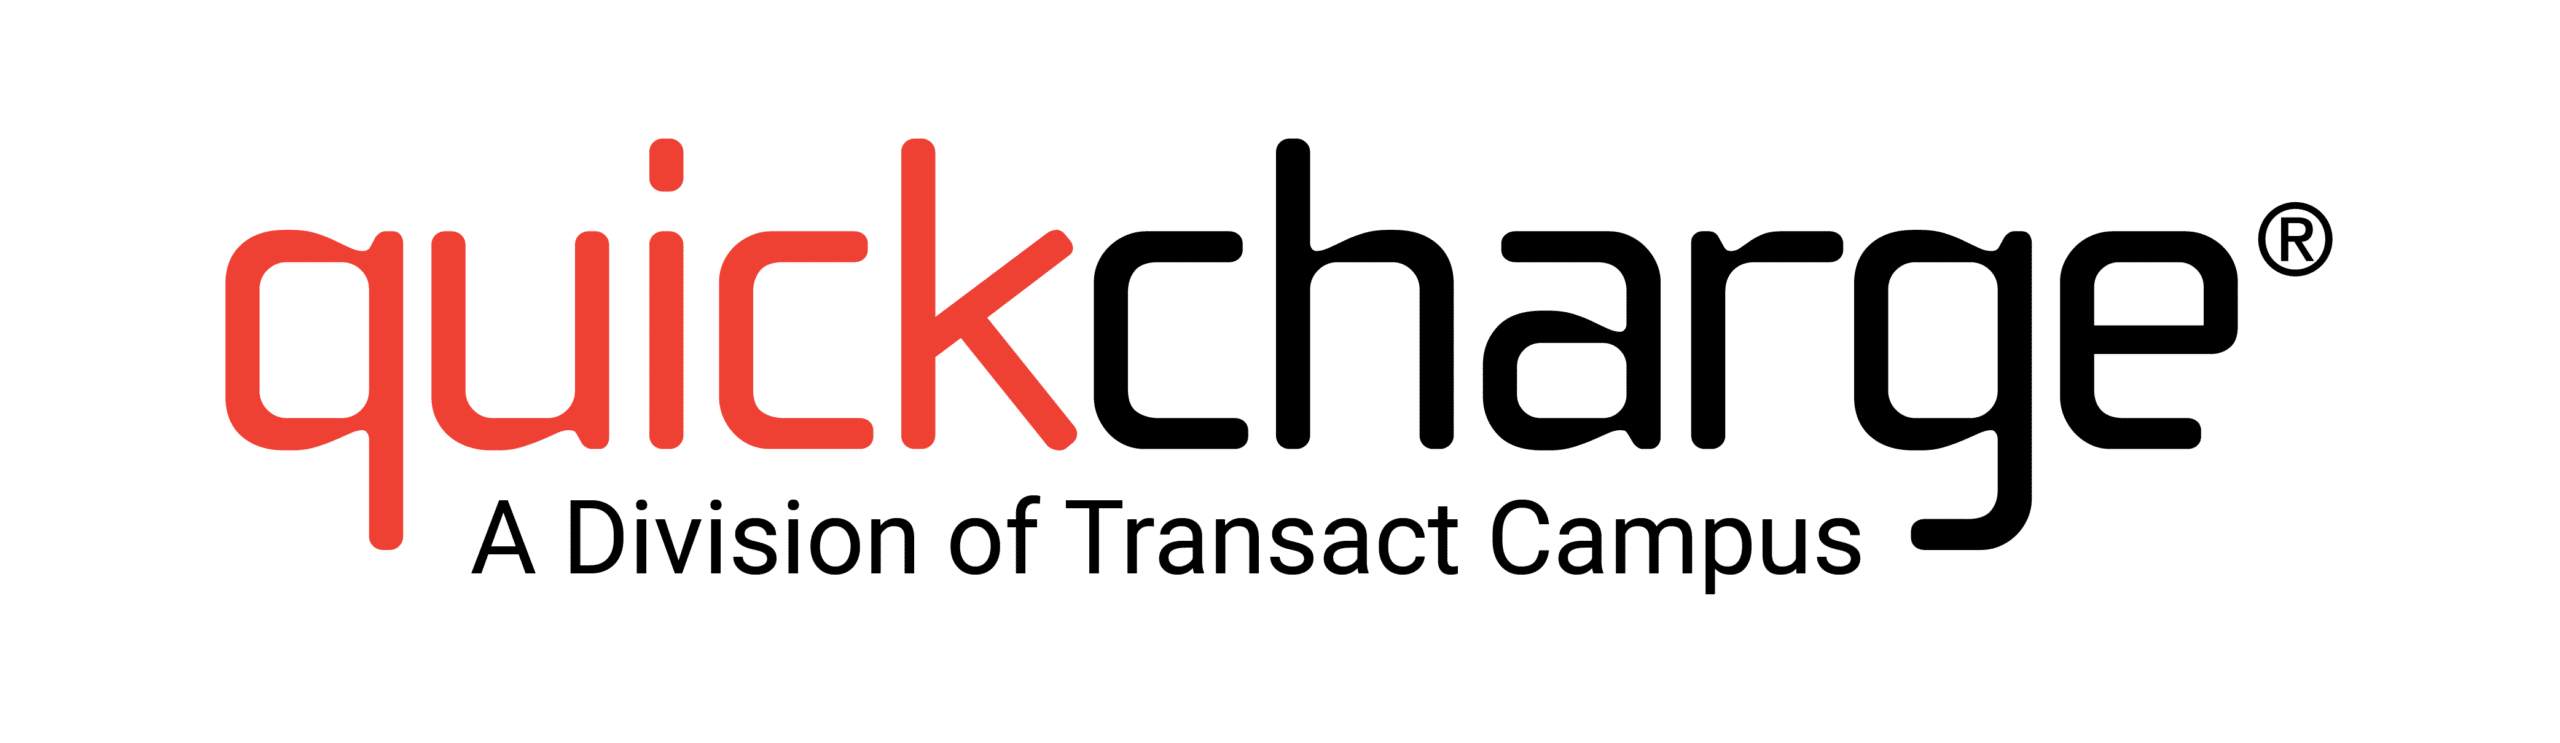 Quickcharge Transact Logo Color